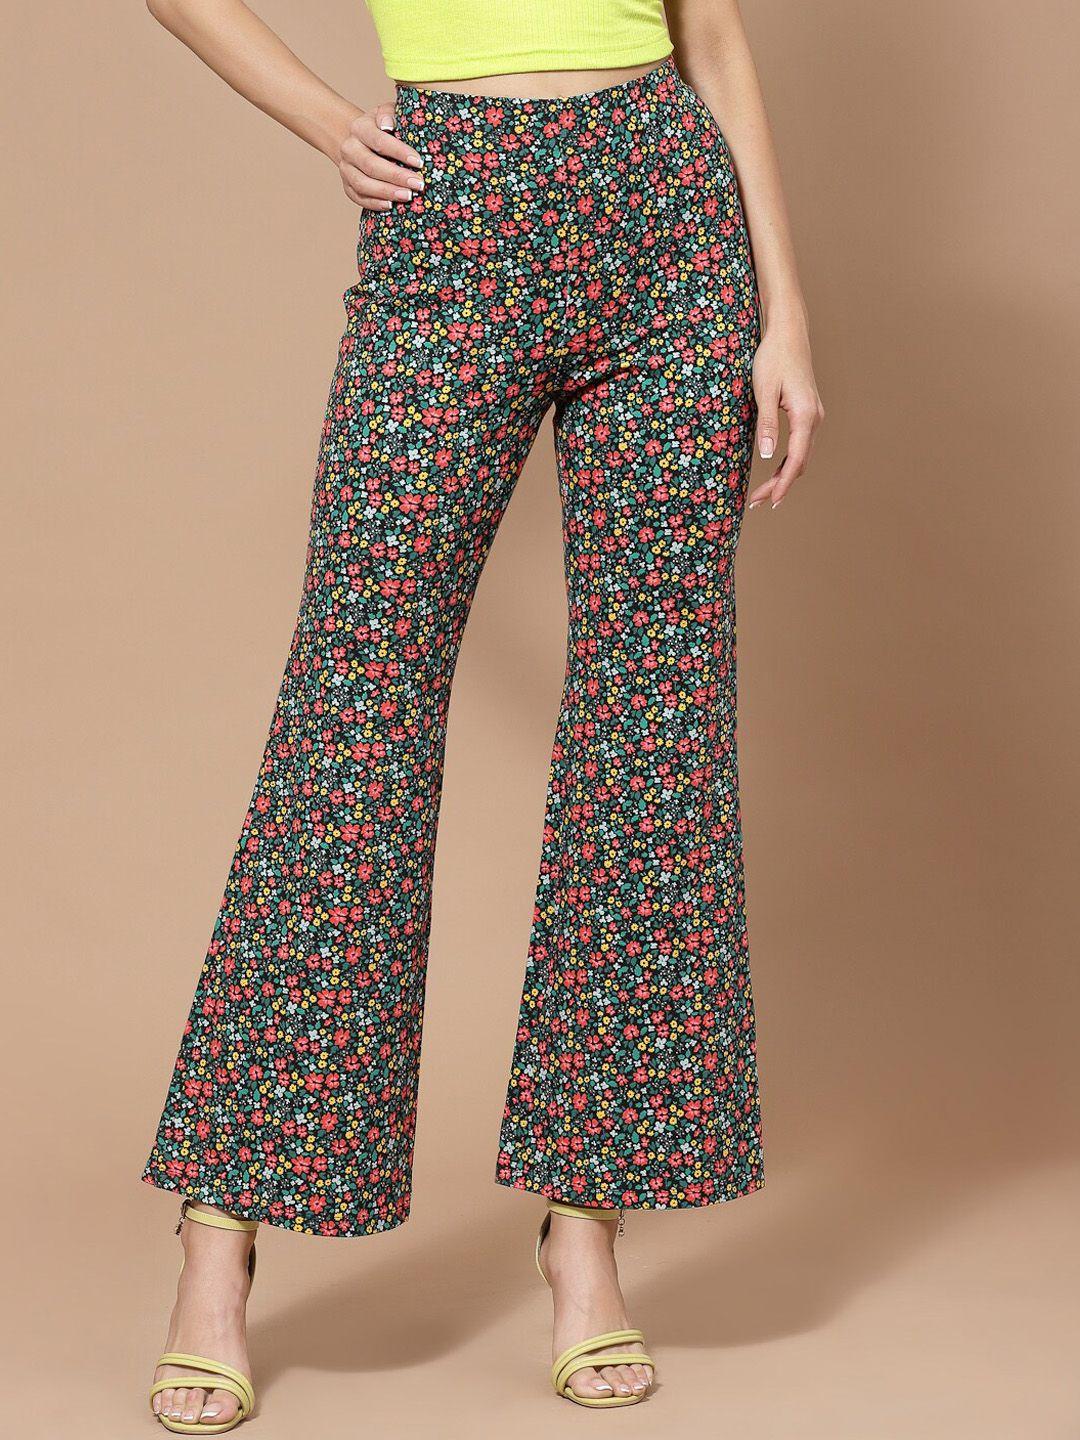 kassually women red floral printed high-rise cotton trousers